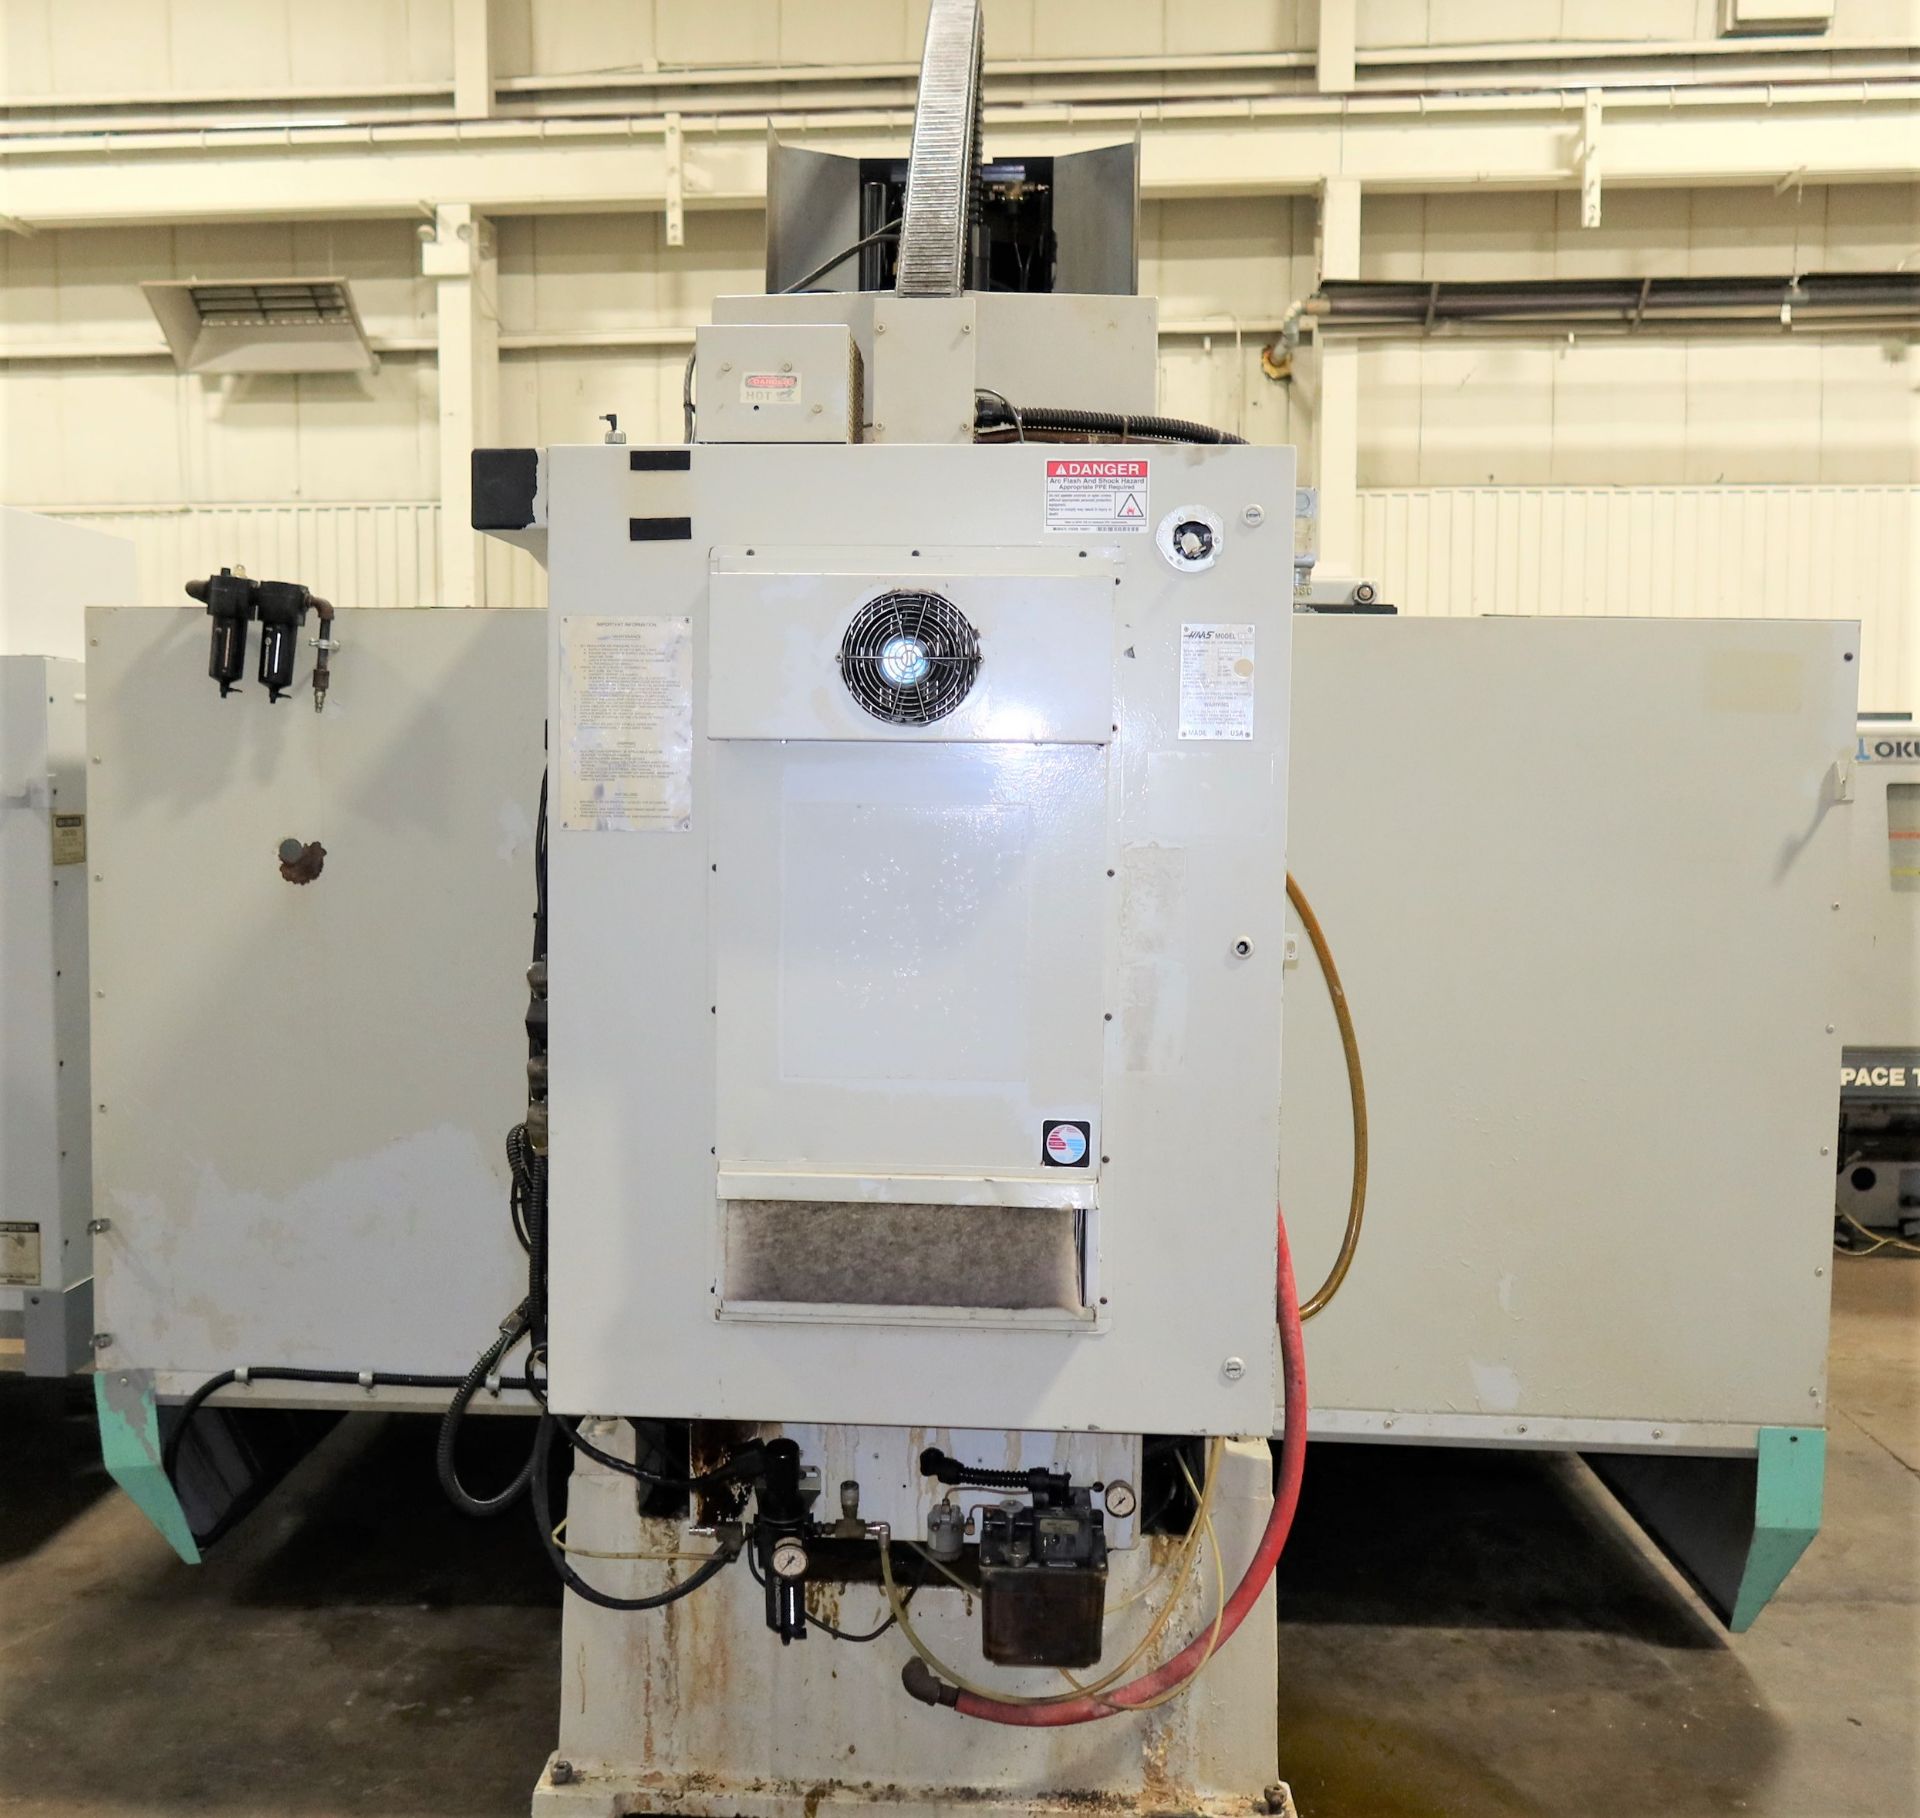 Haas VF-3B 4-Axis CNC Vertical Machining Center, S/N 9067, New 1997 - Image 8 of 10